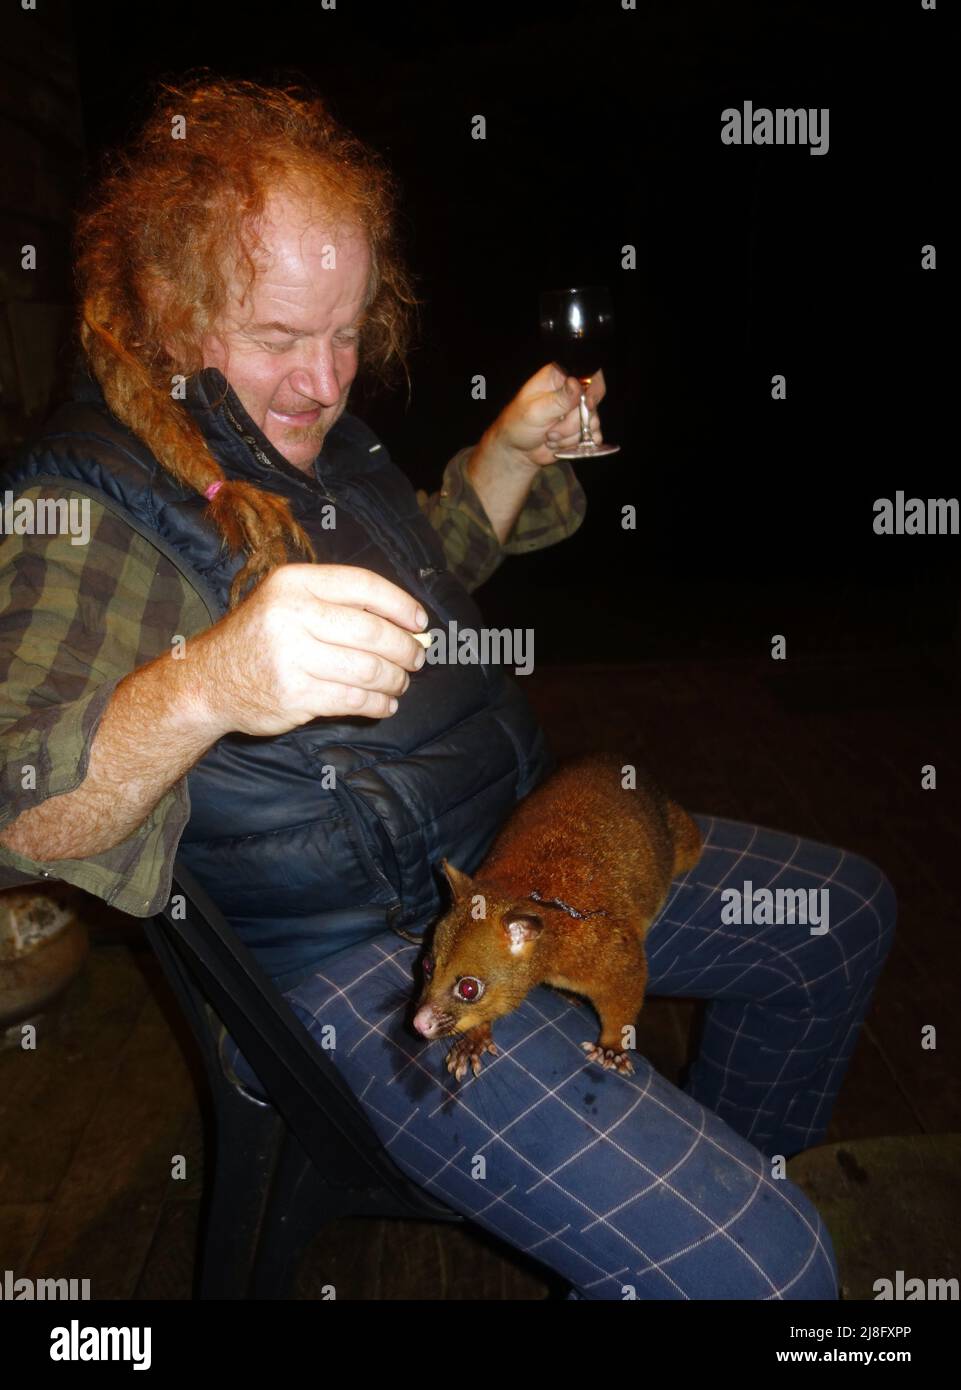 Coppery brushtailed possum ( ) unexpectedly jumps in lap of red-haired man drinking wine, Atherton Tablelands, near Cairns, Queensland, Australia. No Stock Photo